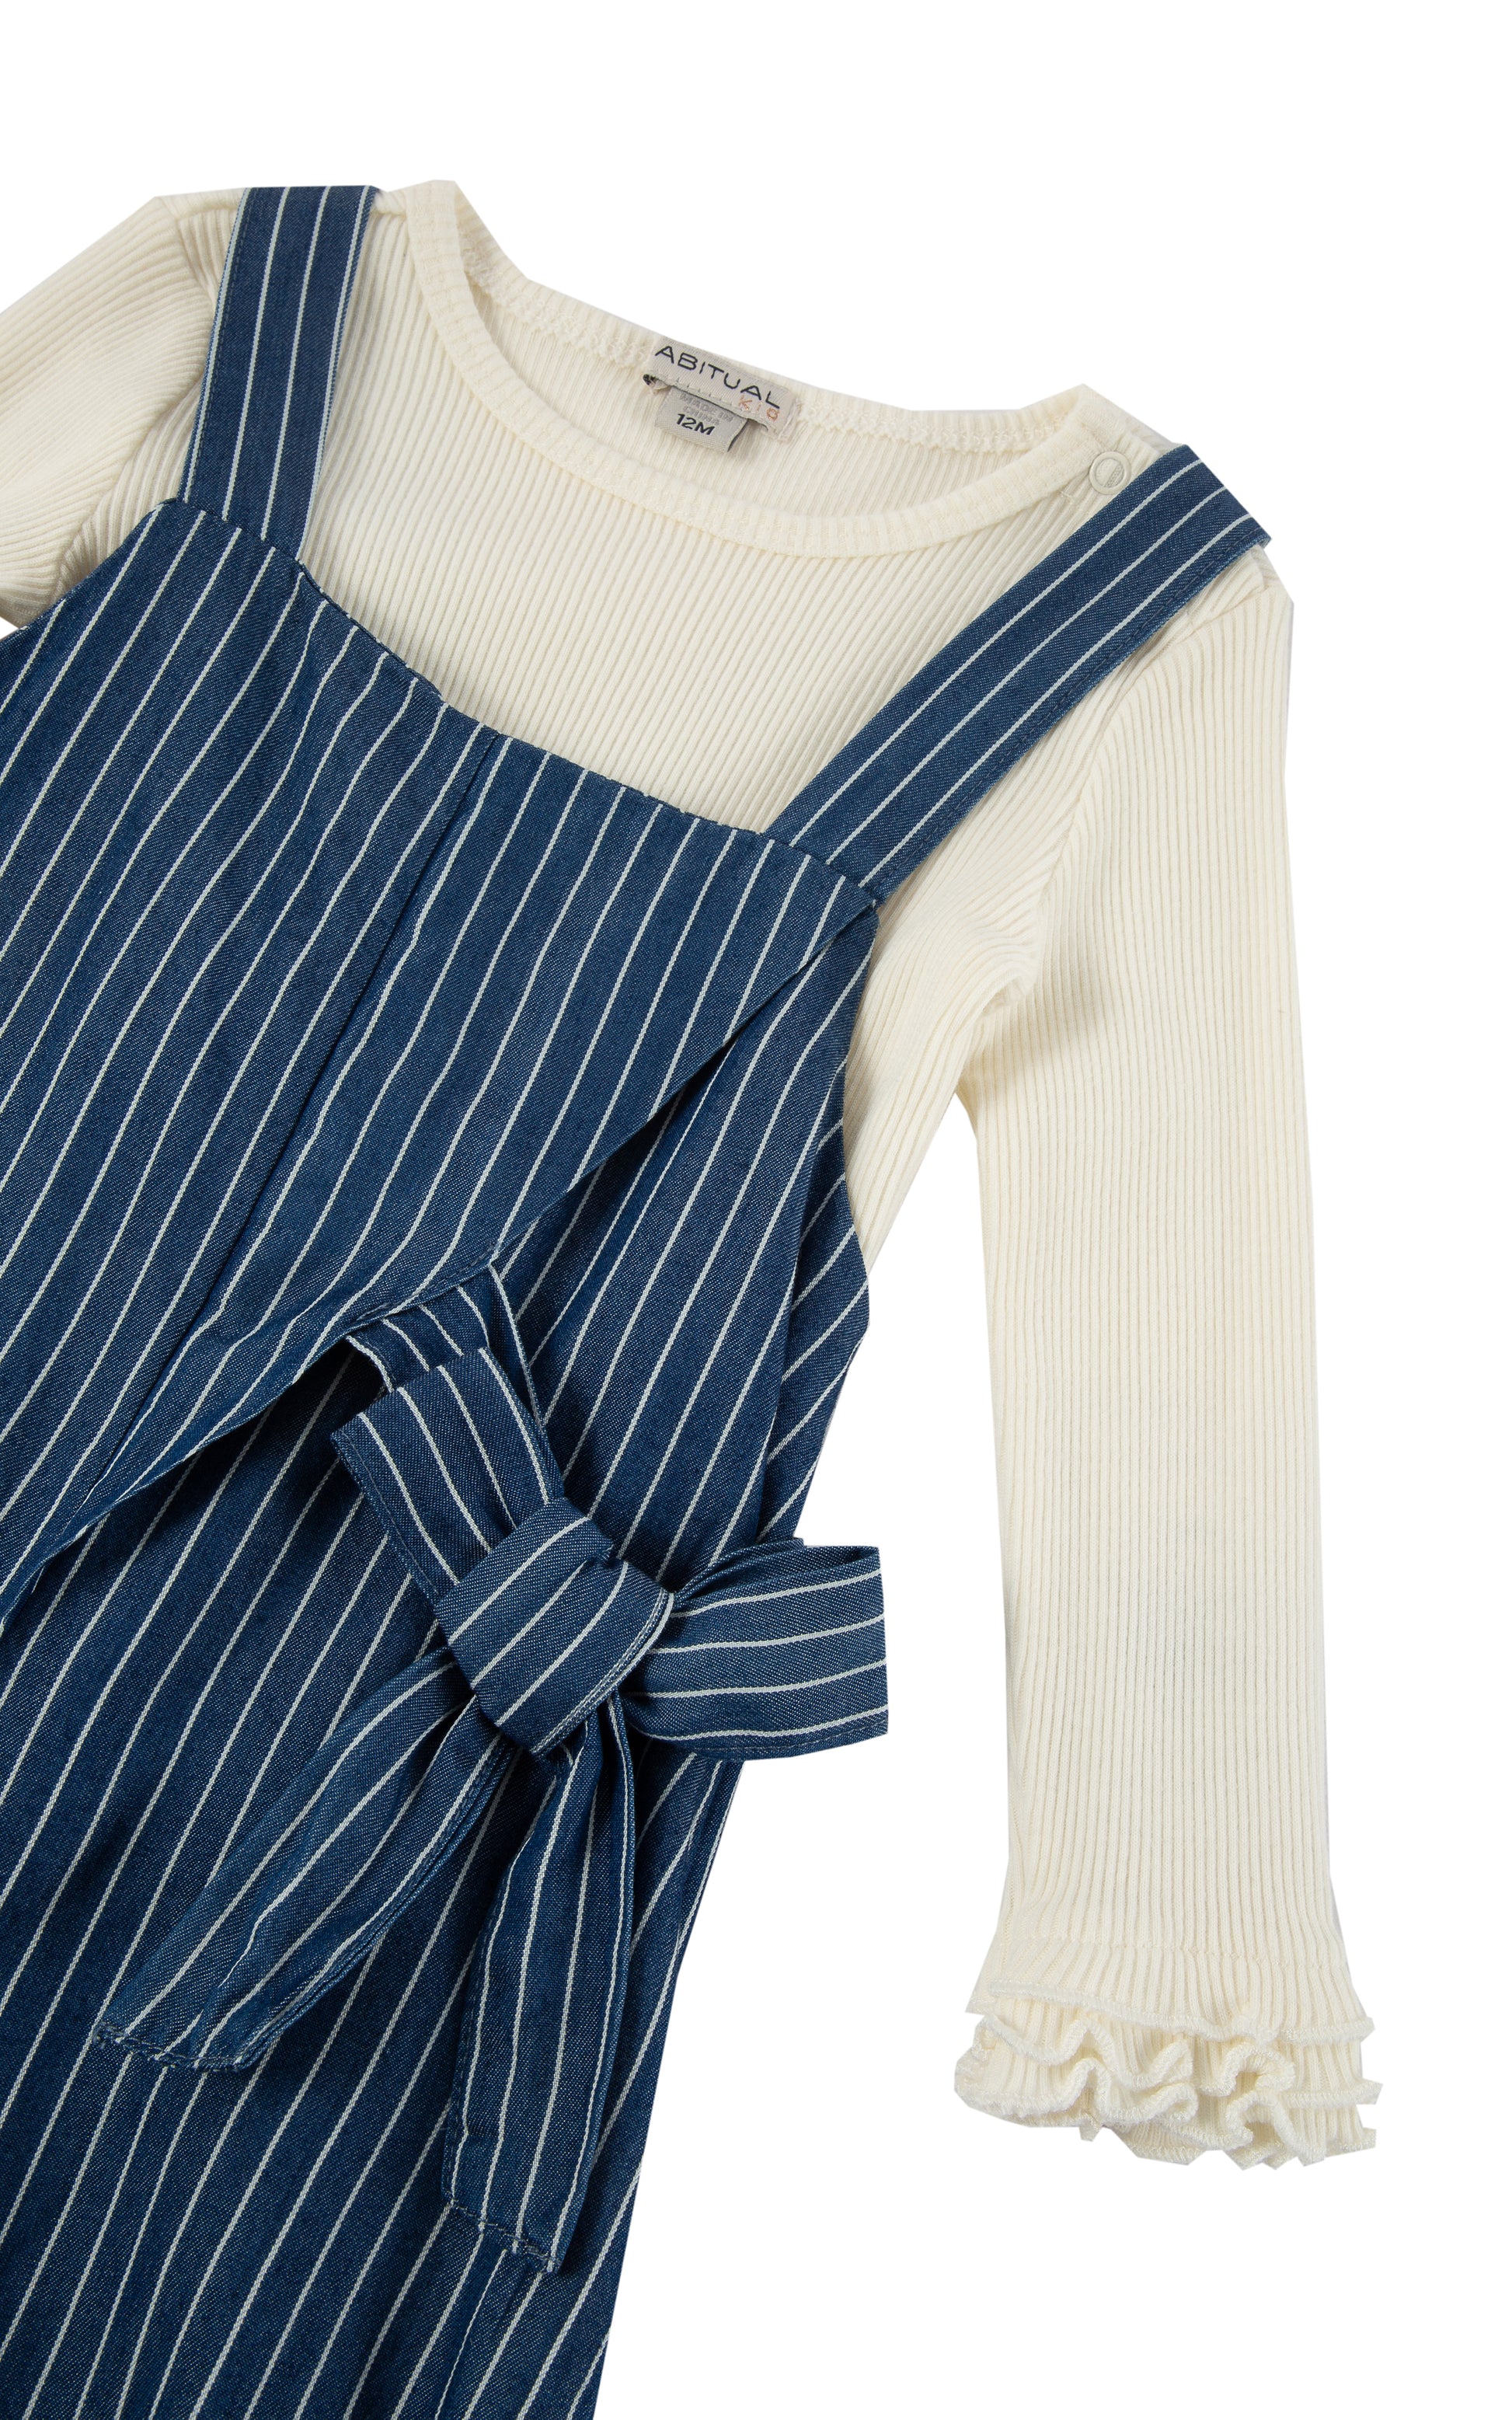 Close up of top portion of blue with white pinstripe overalls and white long-sleeve top with ruffles at cuff.